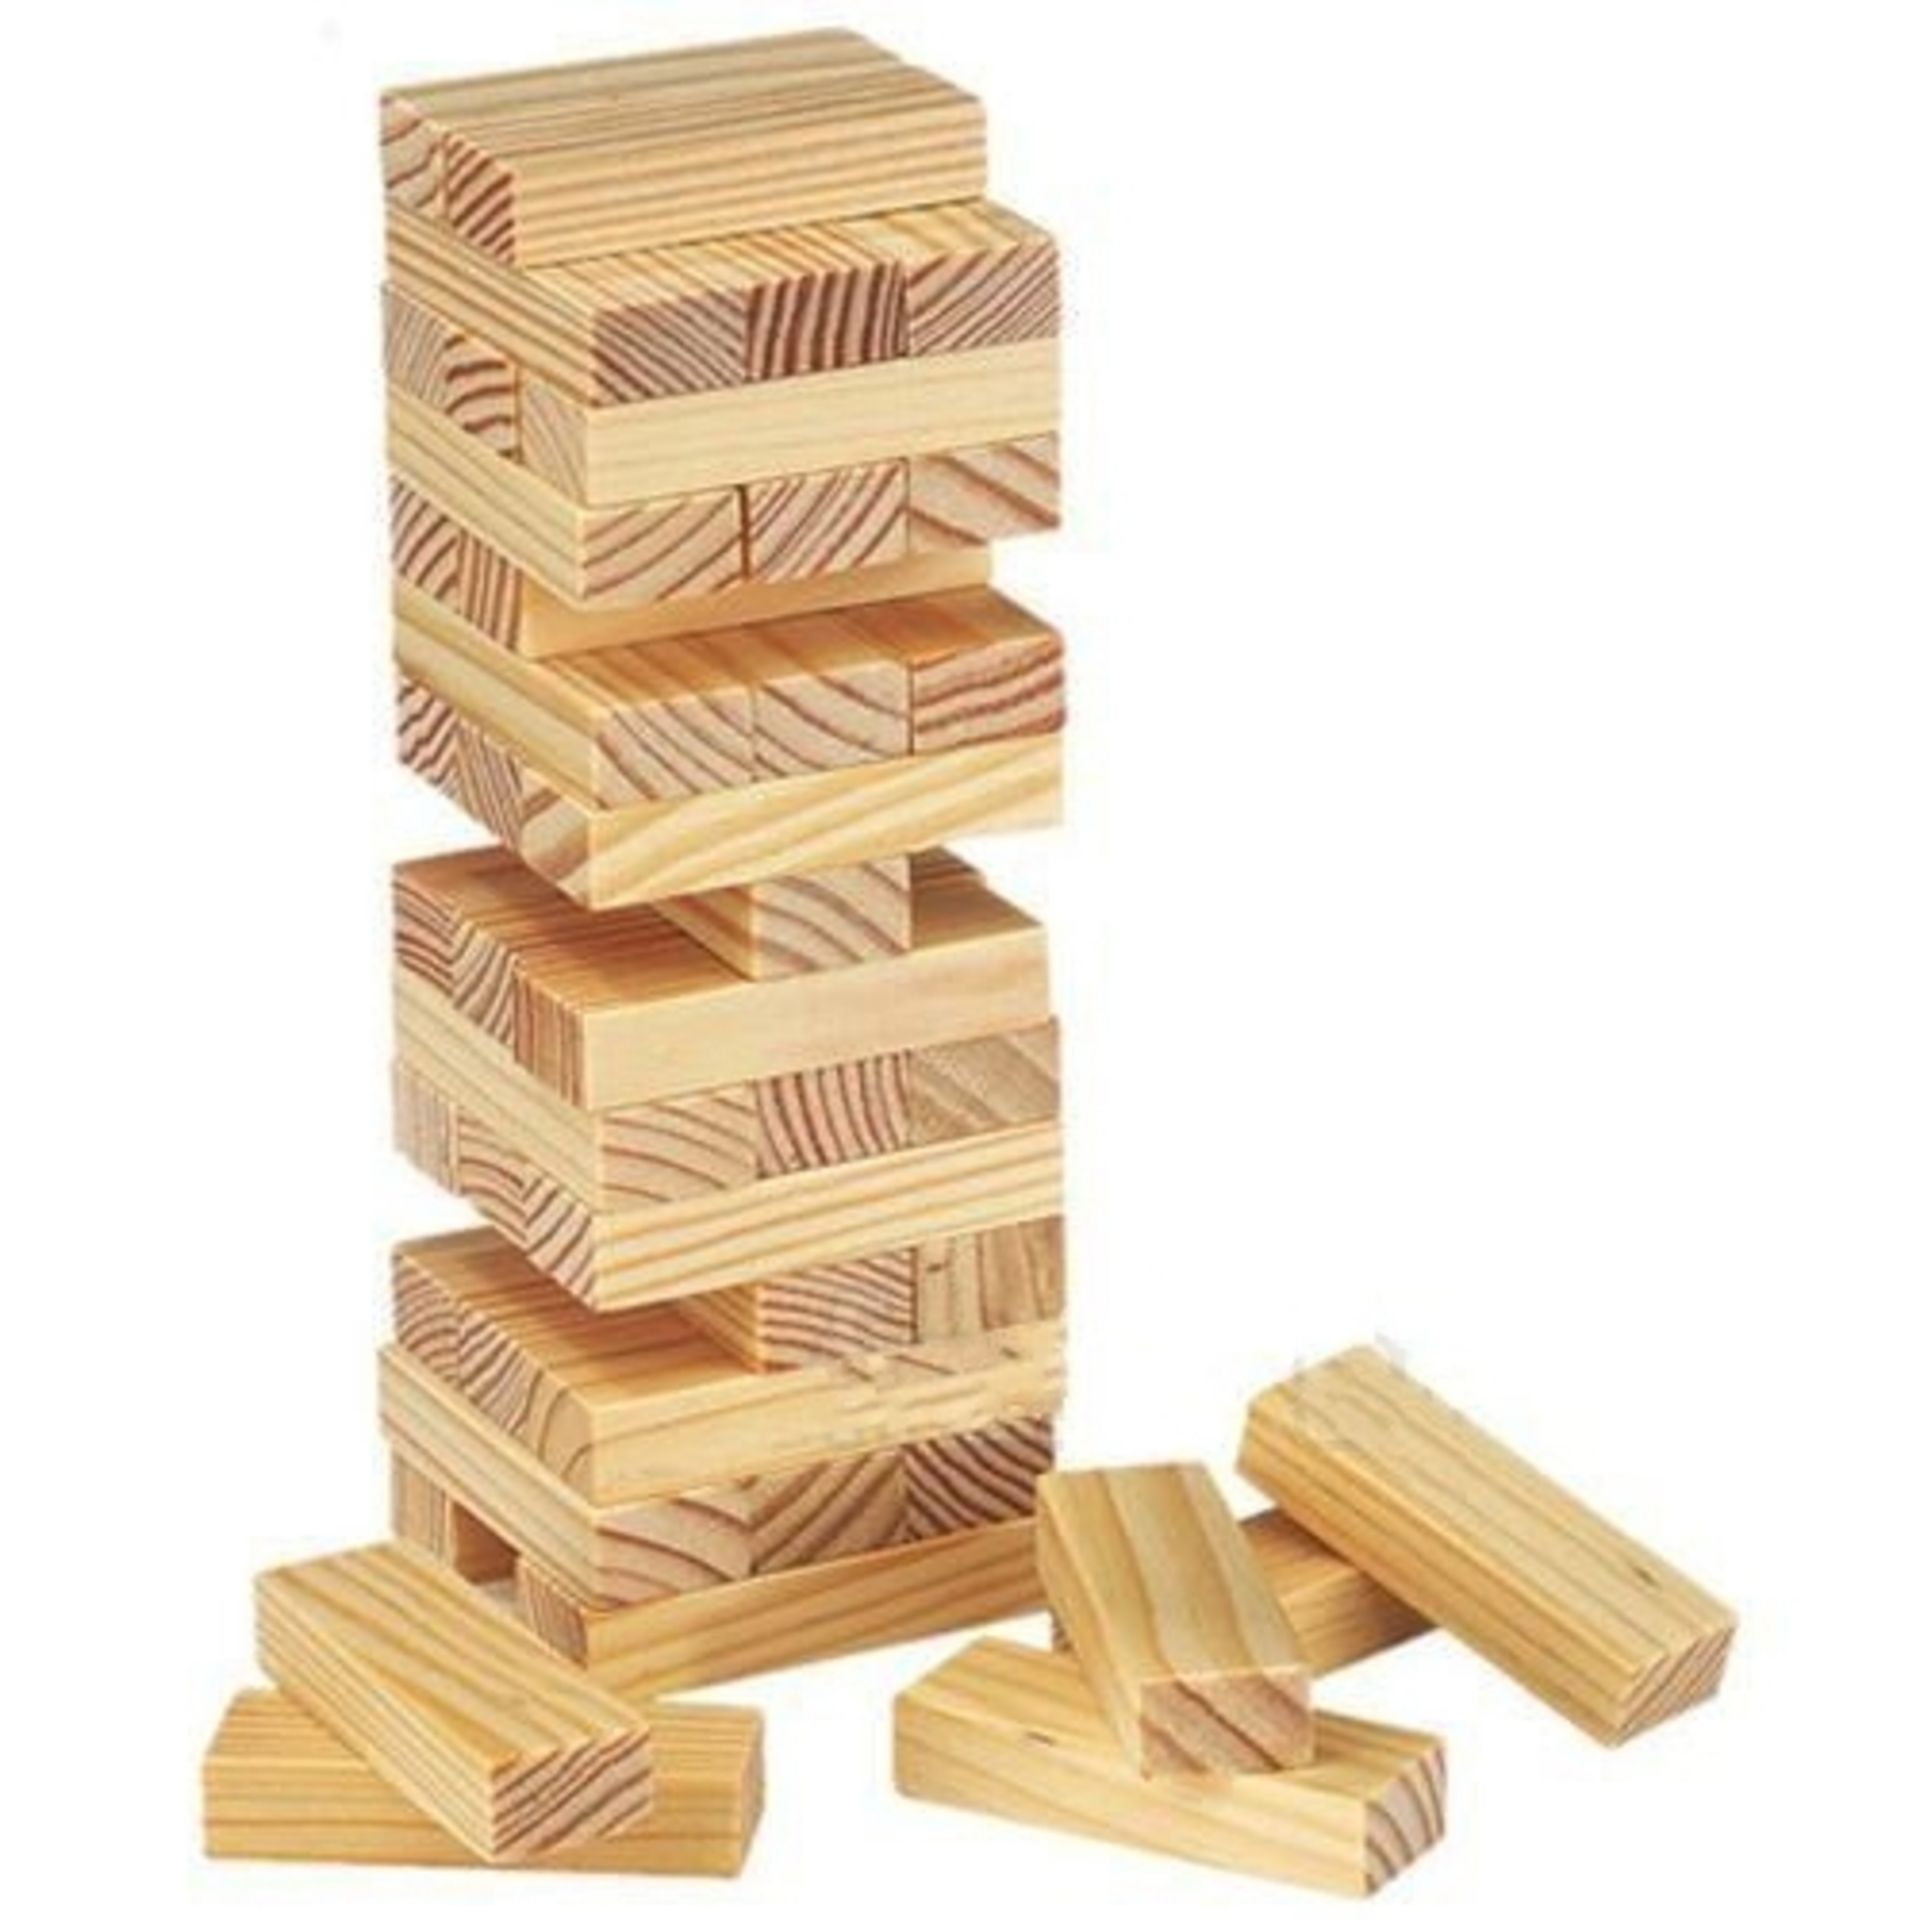 V *TRADE QTY* Brand New Quality Wooden Tower Block Game X 4 YOUR BID PRICE TO BE MULTIPLIED BY FOUR